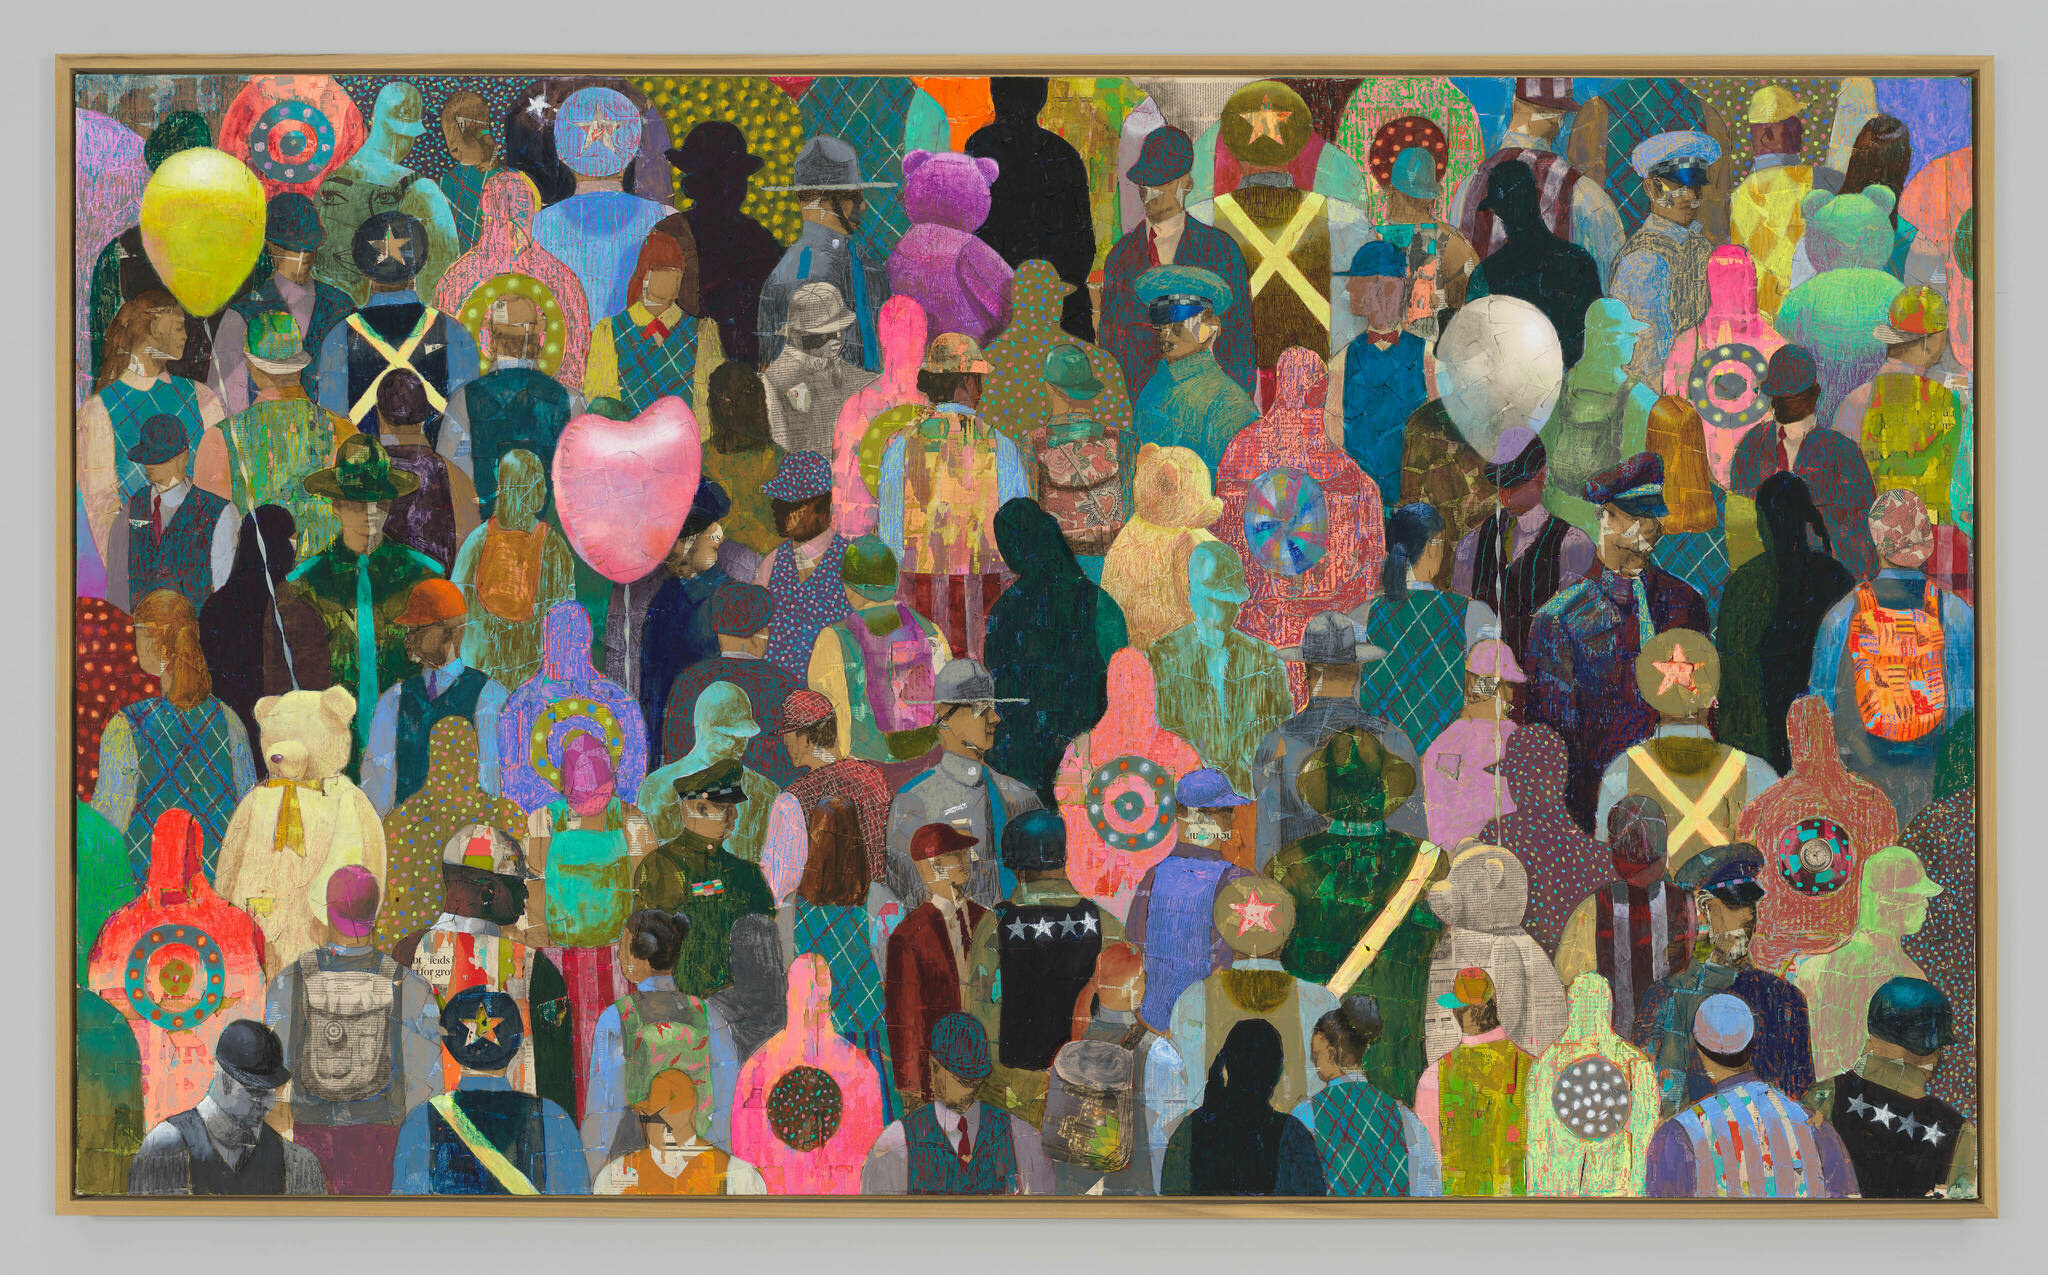 A crowd of patterned figures and balloons, overlapping seemingly extending outside of the frame